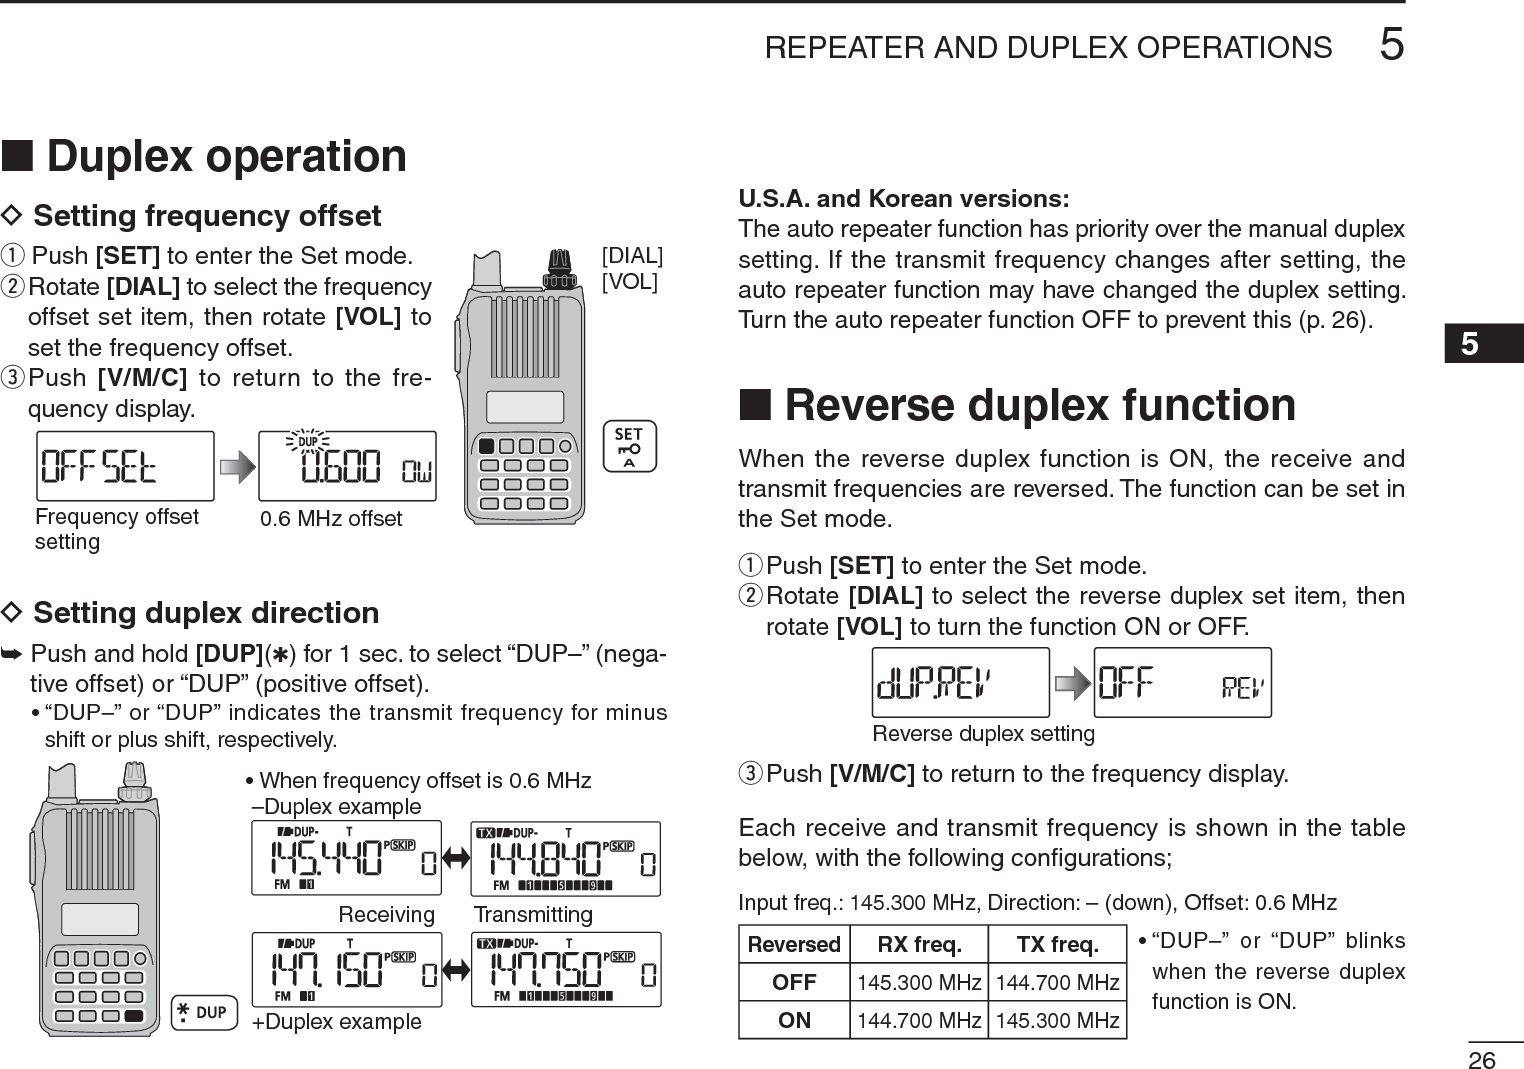 265REPEATER AND DUPLEX OPERATIONS12345678910111213141516171819N Duplex operationDSetting frequency offsetq  Push [SET] to enter the Set mode.w  Rotate [DIAL] to select the frequency offset set item, then rotate [VOL] to set the frequency offset.e  Push  [V/M/C] to return to the fre-quency display.Frequency offset setting0.6 MHz offsetDSetting duplex direction±Push and hold [DUP](1) for 1 sec. to select “DUP–” (nega-tive offset) or “DUP” (positive offset).• “DUP–” or “DUP” indicates the transmit frequency for minus shift or plus shift, respectively.• When frequency offset is 0.6 MHz–Duplex example+Duplex exampleReceiving TransmittingU.S.A. and Korean versions:The auto repeater function has priority over the manual duplex setting. If the transmit frequency changes after setting, the auto repeater function may have changed the duplex setting. Turn the auto repeater function OFF to prevent this (p. 26).N Reverse duplex functionWhen the reverse duplex function is ON, the receive and transmit frequencies are reversed. The function can be set in the Set mode.qPush [SET] to enter the Set mode.w  Rotate [DIAL] to select the reverse duplex set item, then rotate [VOL] to turn the function ON or OFF.Reverse duplex settingePush [V/M/C] to return to the frequency display.Each receive and transmit frequency is shown in the table below, with the following conﬁgurations;Input freq.: 145.300 MHz, Direction: – (down), Offset: 0.6 MHz• “DUP–” or “DUP” blinks when the reverse duplex function is ON.ReversedRX freq. TX freq.OFF145.300 MHz 144.700 MHzON144.700 MHz 145.300 MHz[DIAL][VOL]